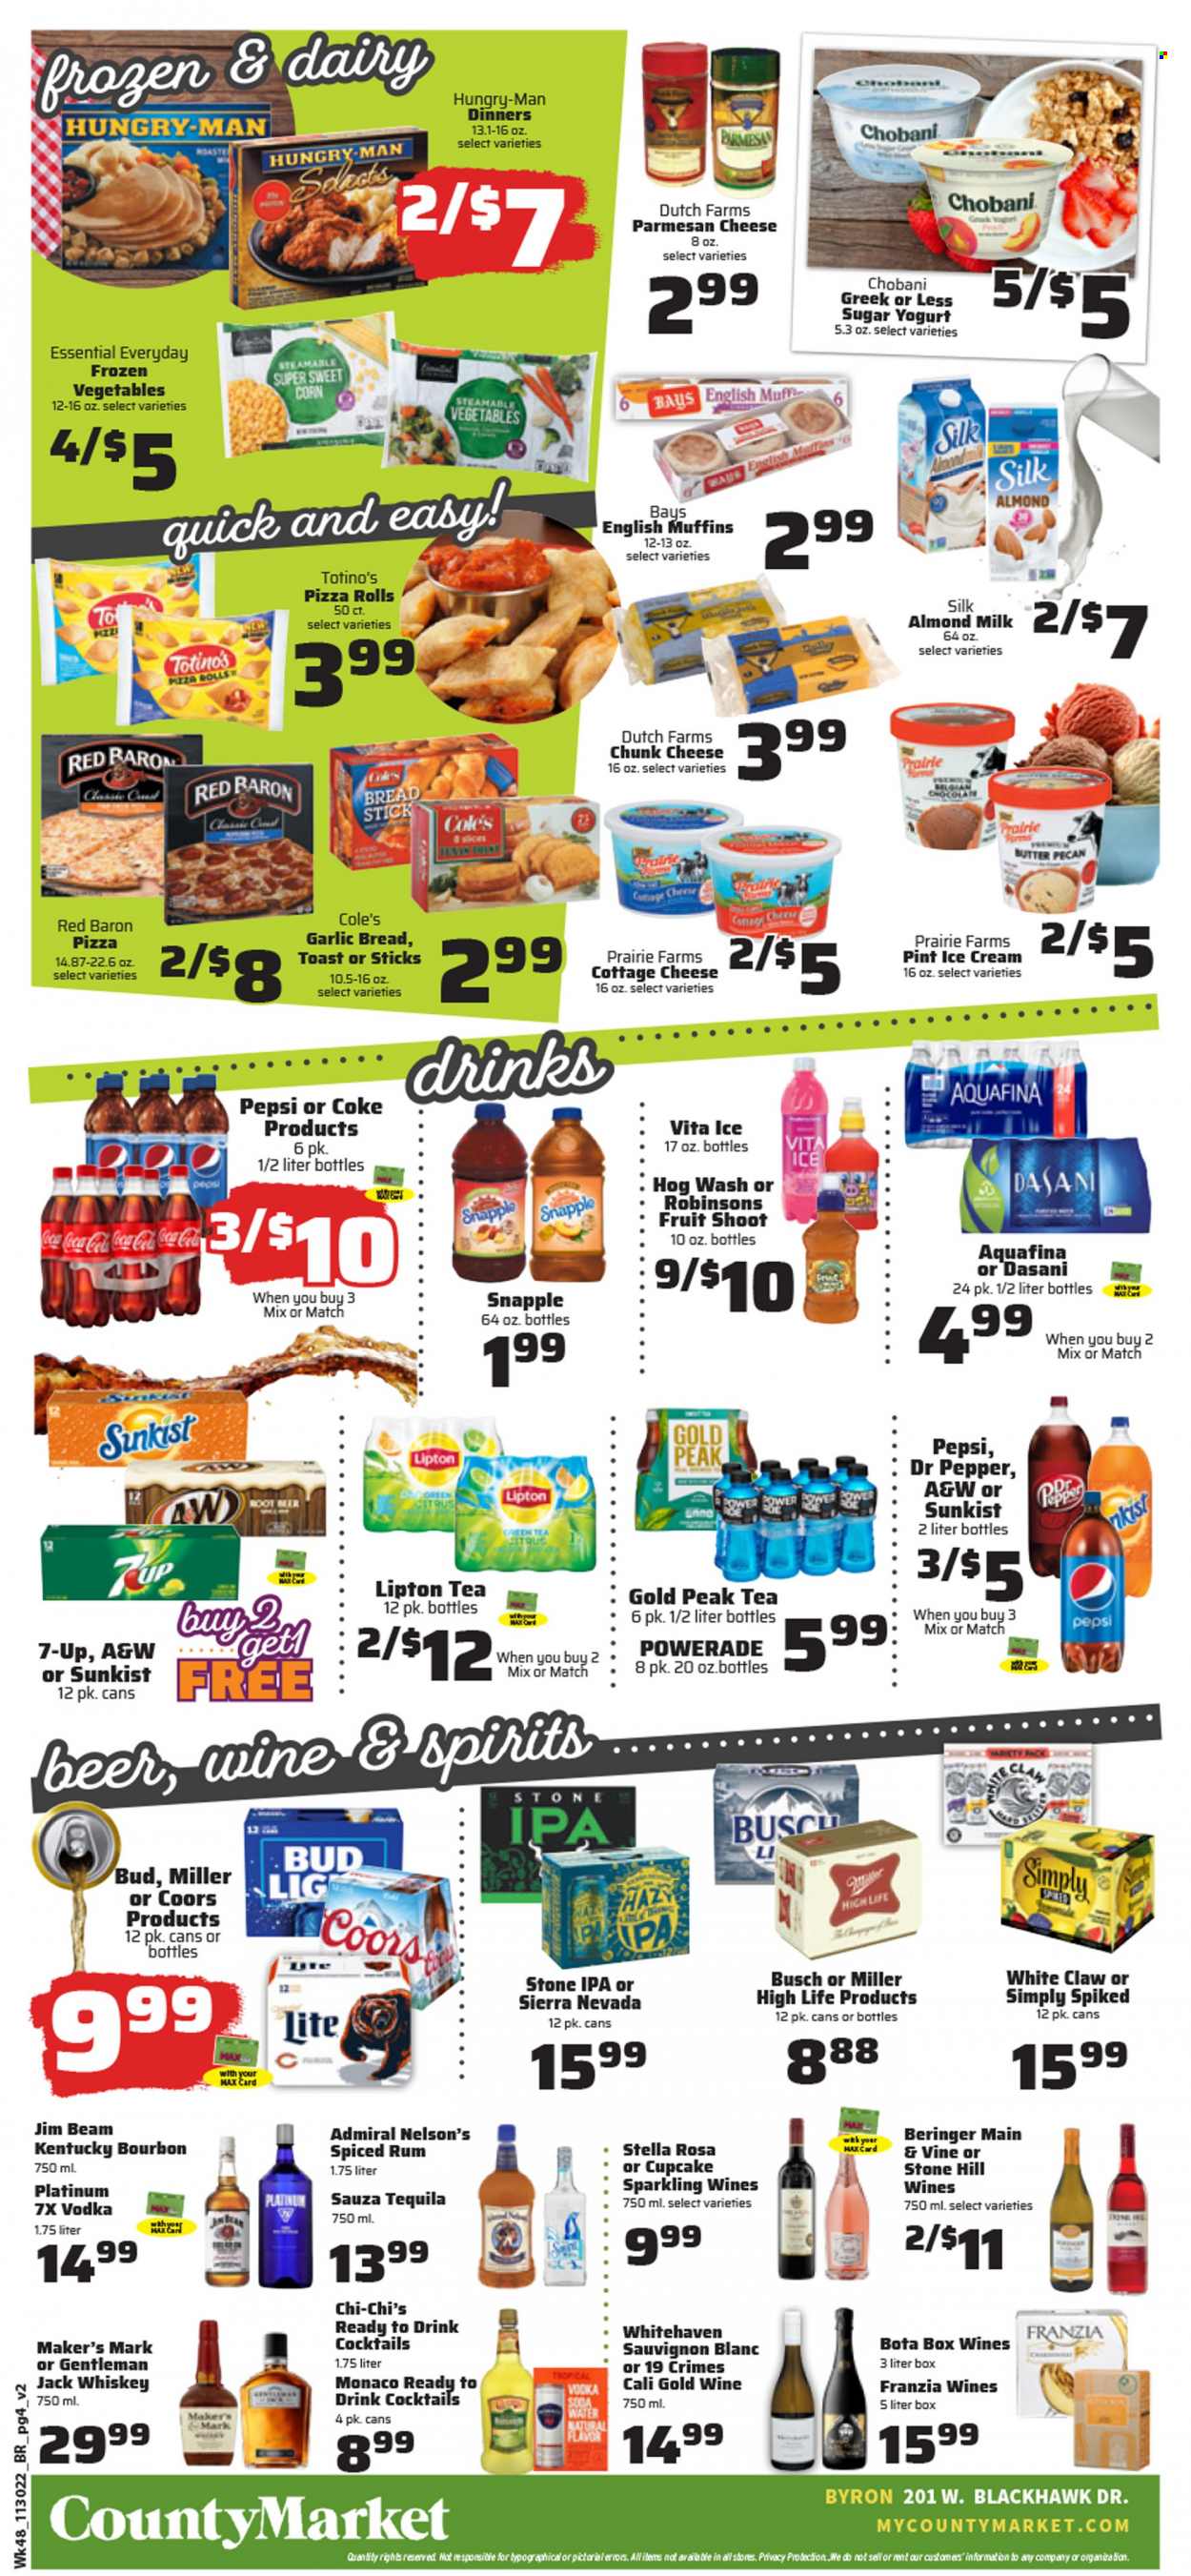 thumbnail - County Market Flyer - 11/30/2022 - 12/06/2022 - Sales products - english muffins, pizza rolls, corn, sweet corn, pizza, cottage cheese, parmesan, chunk cheese, yoghurt, Chobani, almond milk, milk, frozen vegetables, Red Baron, Coca-Cola, Powerade, Pepsi, Lipton, Dr. Pepper, 7UP, Snapple, A&W, Gold Peak Tea, Aquafina, soda, green tea, tea, sparkling wine, white wine, wine, Sauvignon Blanc, bourbon, rum, spiced rum, tequila, vodka, whiskey, Jim Beam, White Claw, whisky, beer, Busch, Miller, IPA, Coors. Page 4.